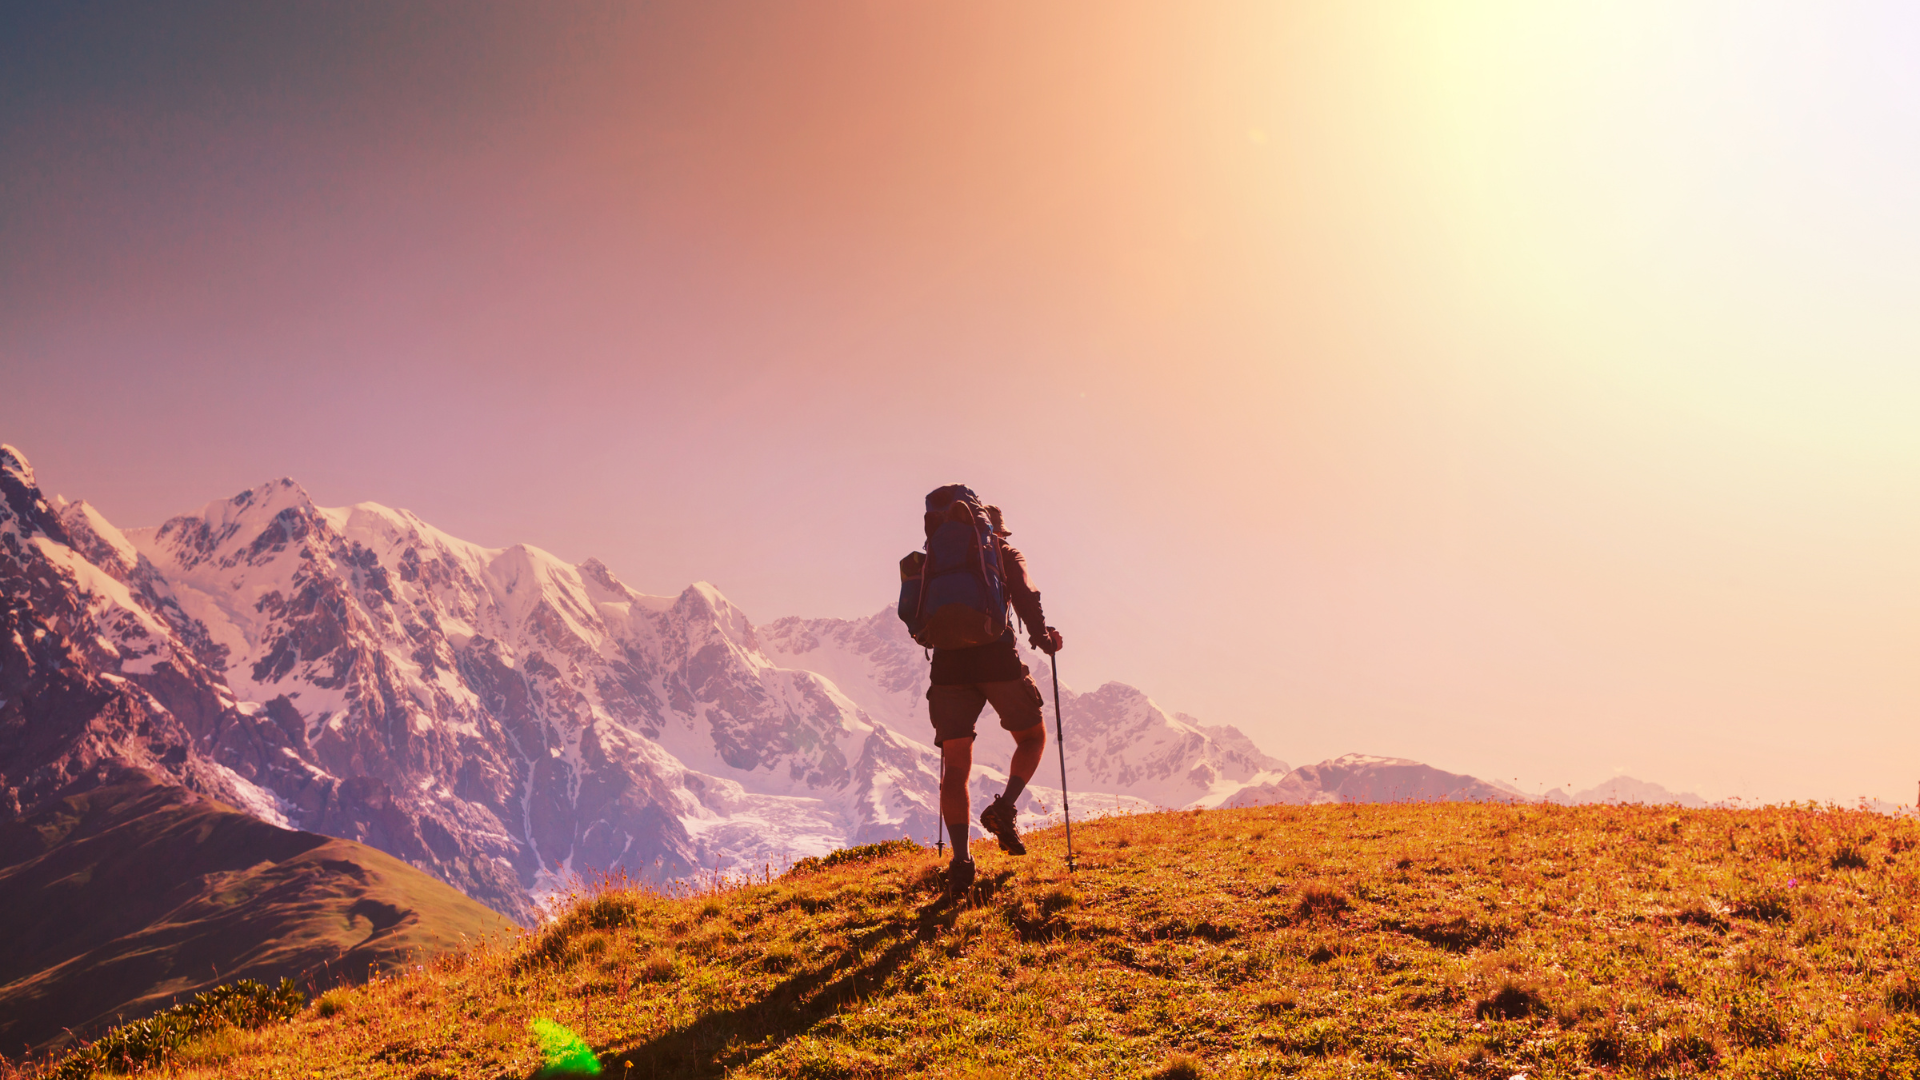 Common Mistakes to Avoid During a Mountain Hike: What to Steer Clear Of